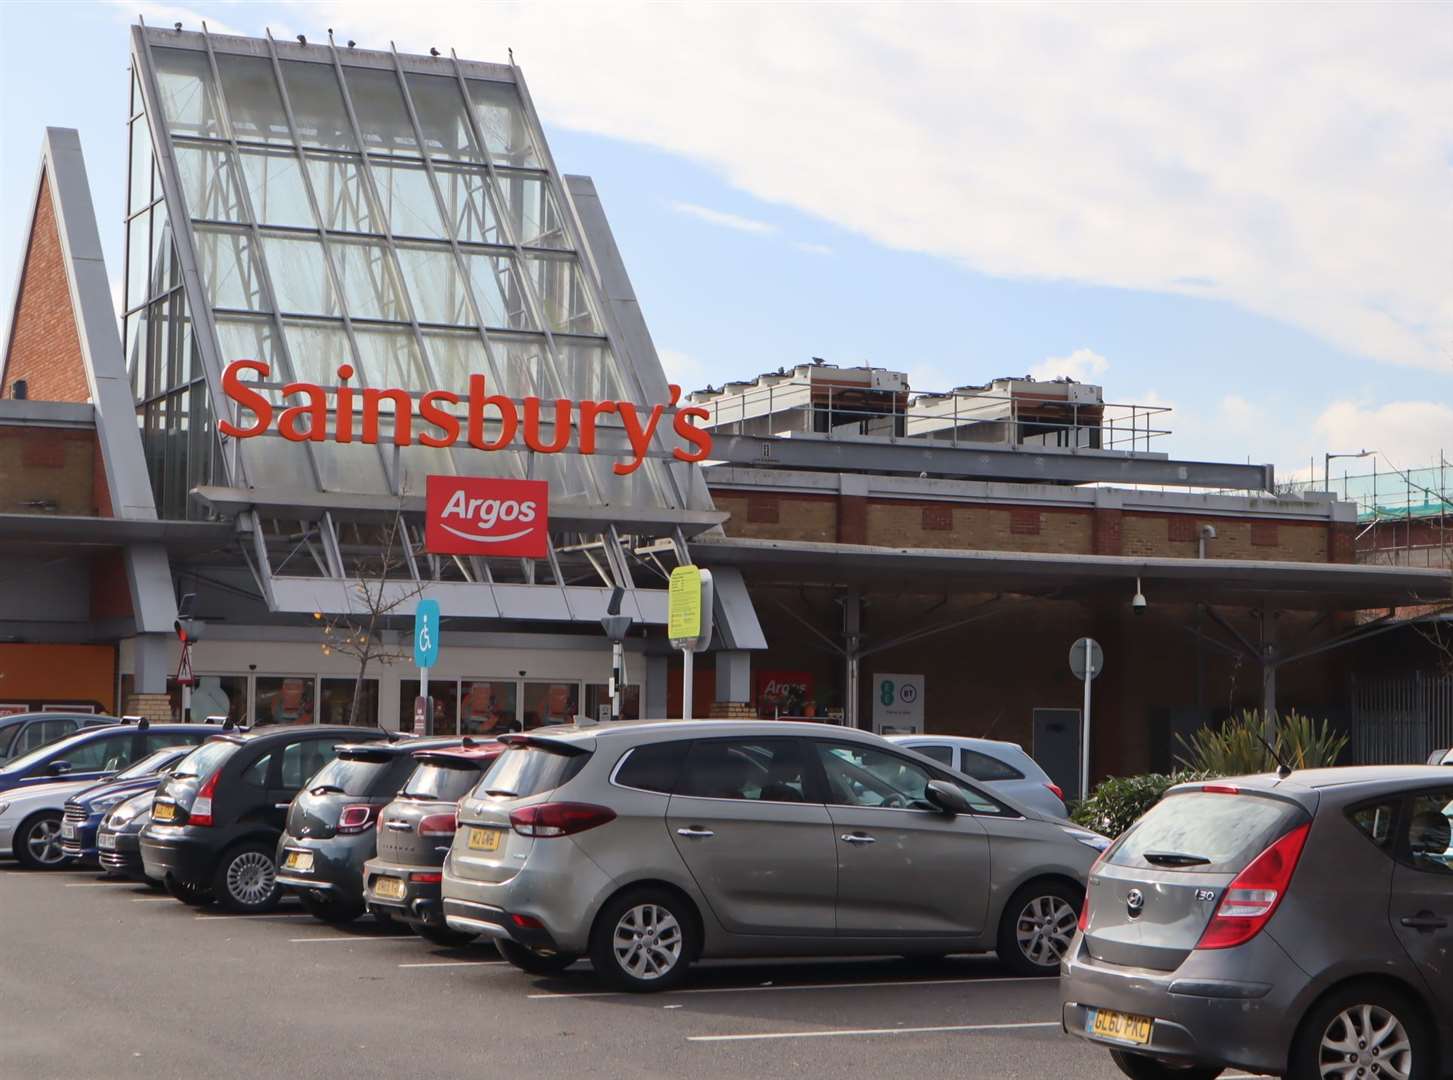 The distribution centre supplies Sainsbury's supermarket across the county